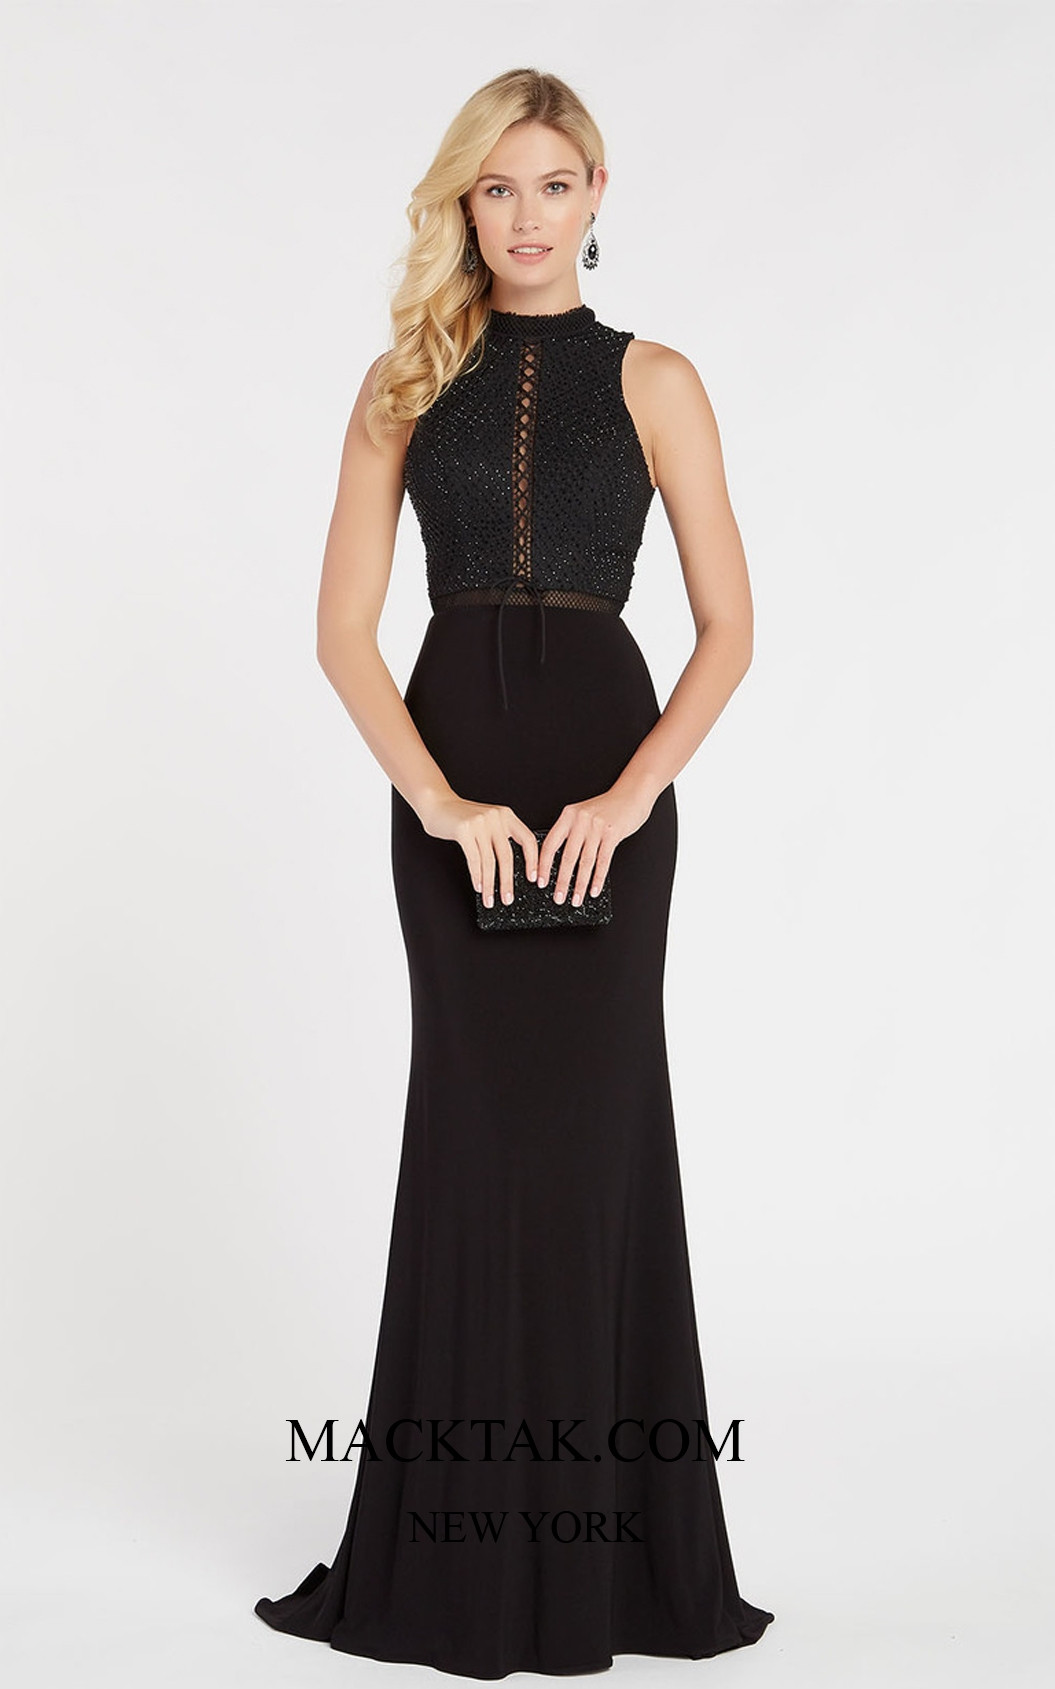 Alyce 60320 Front Dress